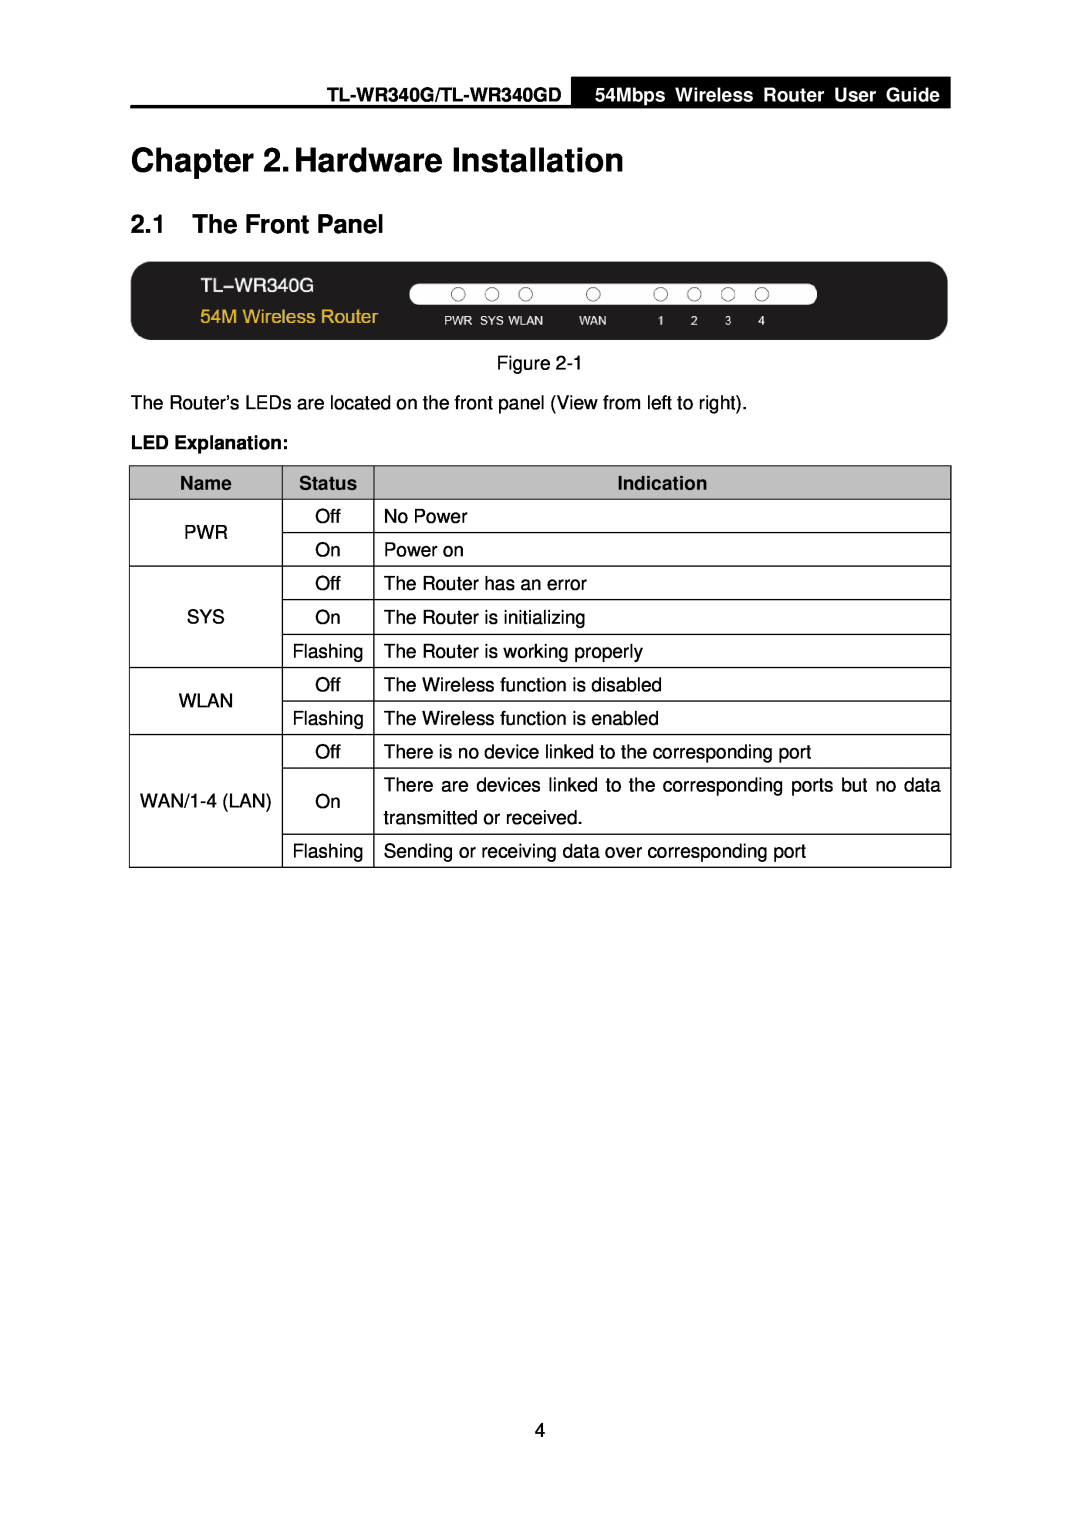 TP-Link Hardware Installation, The Front Panel, TL-WR340G/TL-WR340GD, 54Mbps Wireless Router User Guide, Indication 